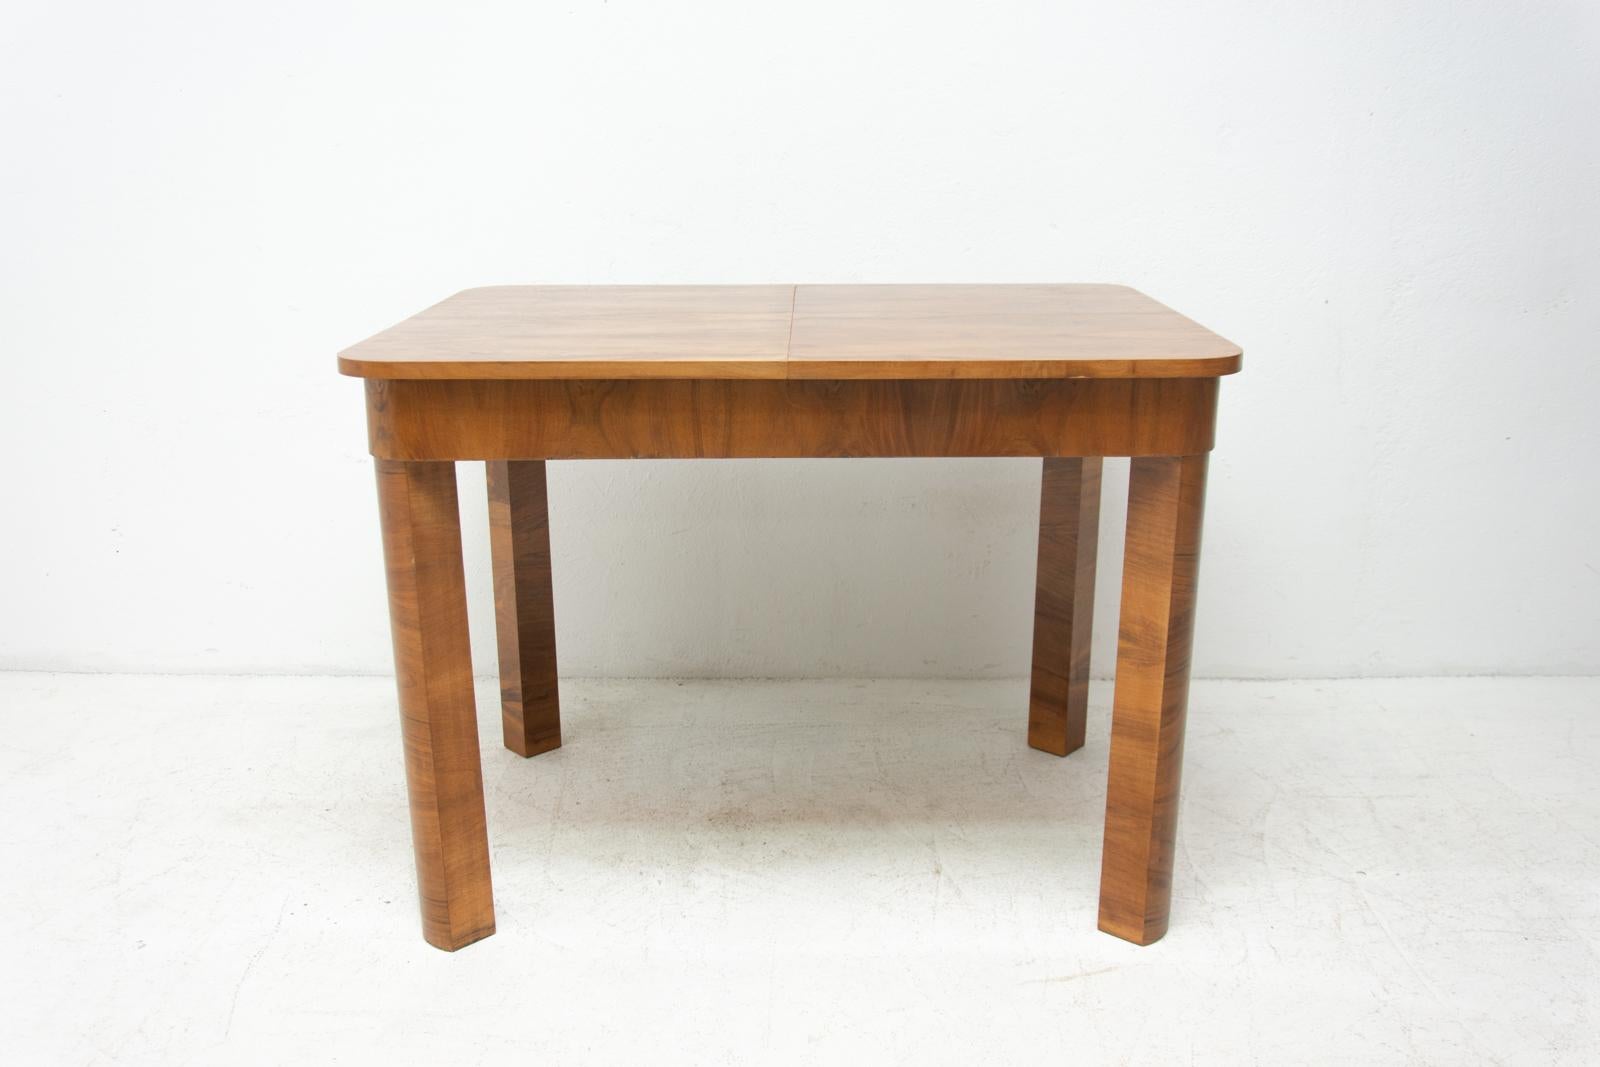 This Art Deco adjustable dining table was made probably by UP Závody company in the 1940s in the former Czechoslovakia. It´s made of walnut. The table is in excellent condition, fully refurbished.

Dimensions:

110 x 81 x 80 cm (Length x height